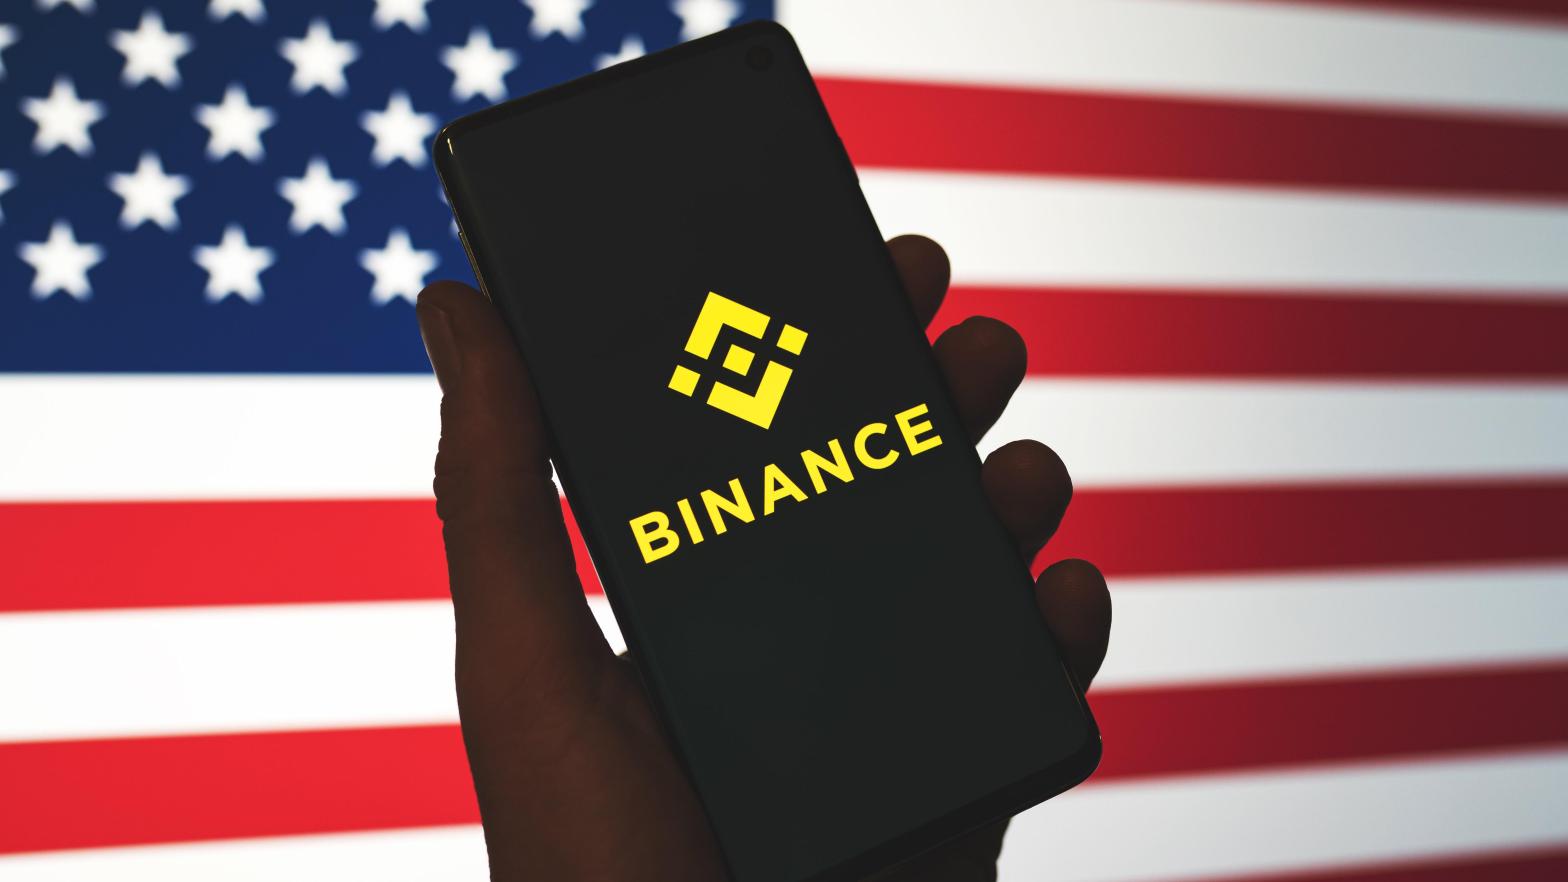 U.S. authorities have been reportedly investigating Binance for nearly four years. Recent enforcement actions against entities connected to Binance is putting even more pressure on the world's largest exchange. (Photo: salarko, Shutterstock)